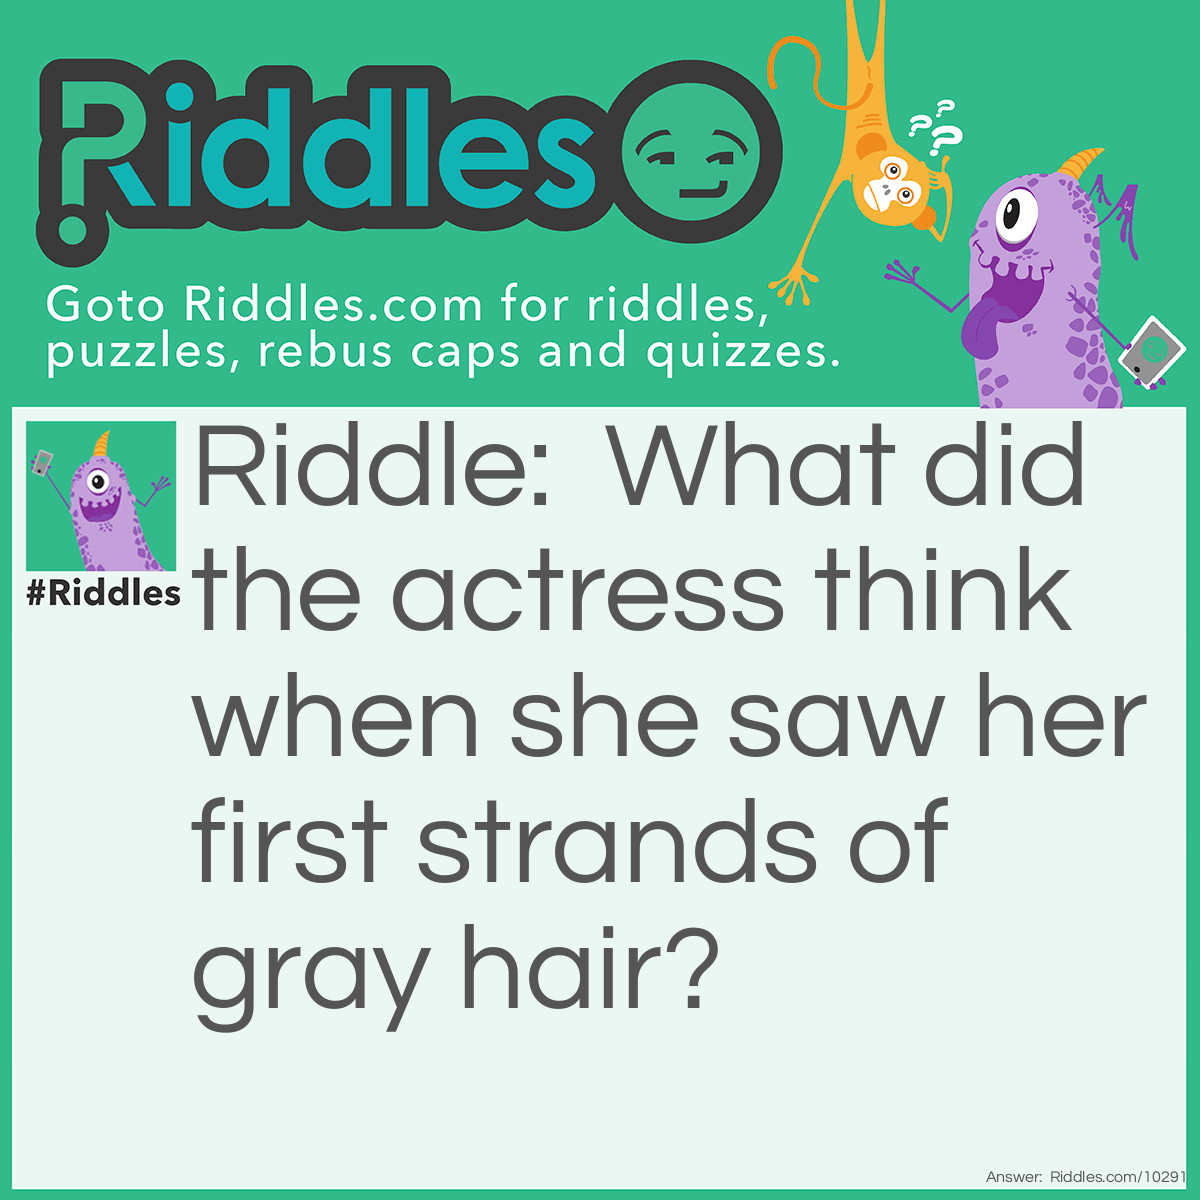 Riddle: What did the actress think when she saw her first strands of gray hair? Answer: She thought she'd dye.